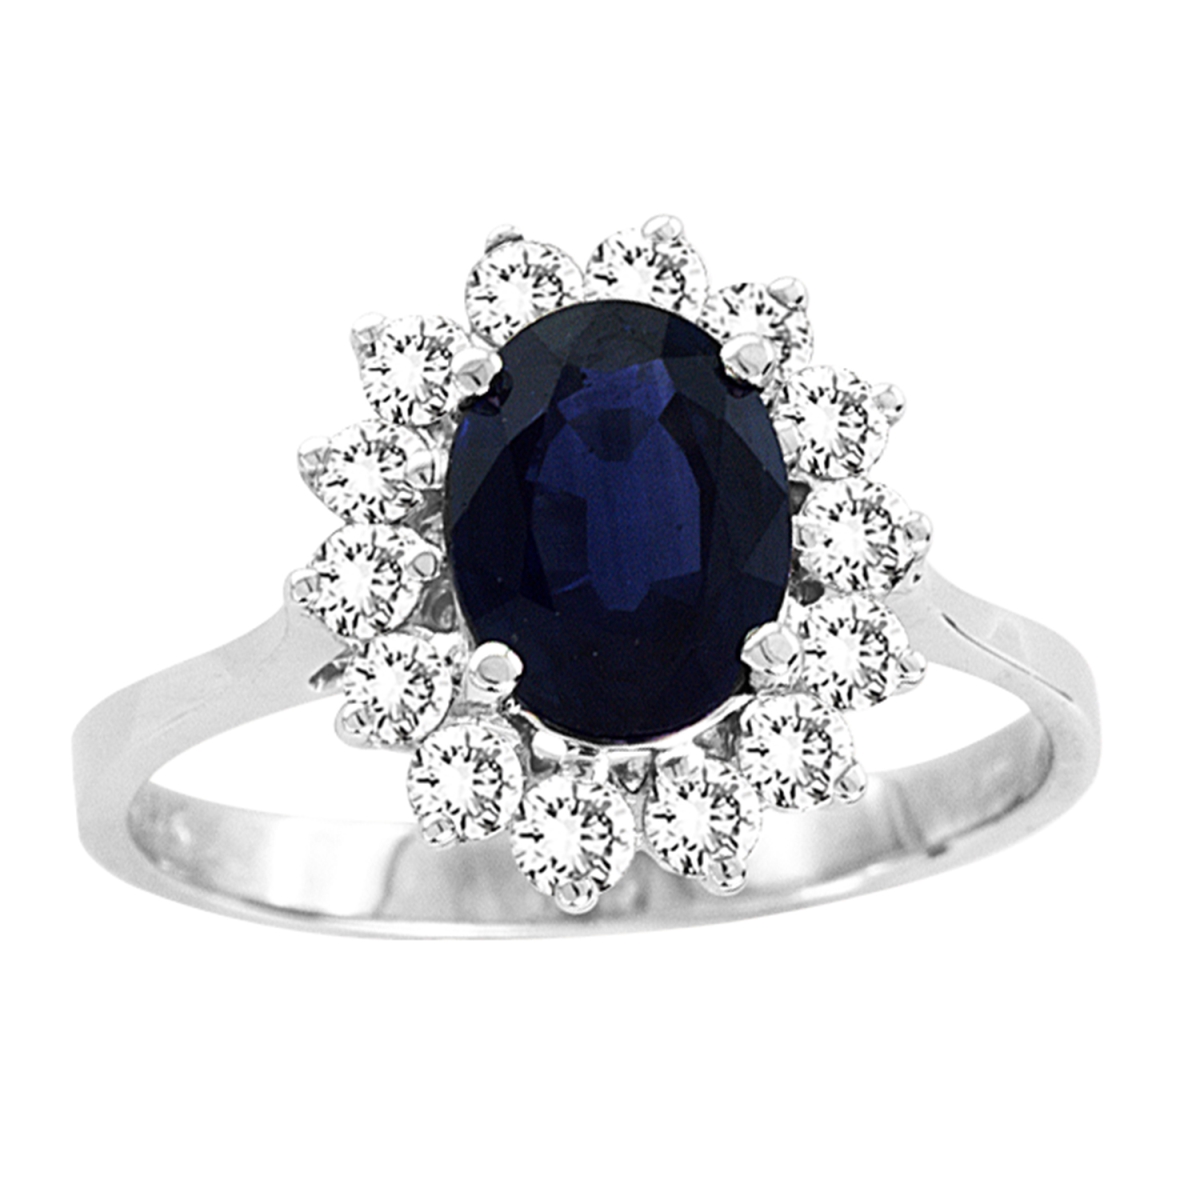 Picture of Louis Creations R1548SD-4 14K Gold Royal Collection 1.75 CTTW 8 x 6 mm 1.35 Carat Oval Sapphire Center Stone Natural Sapphire & Diamond Ring - Size 4